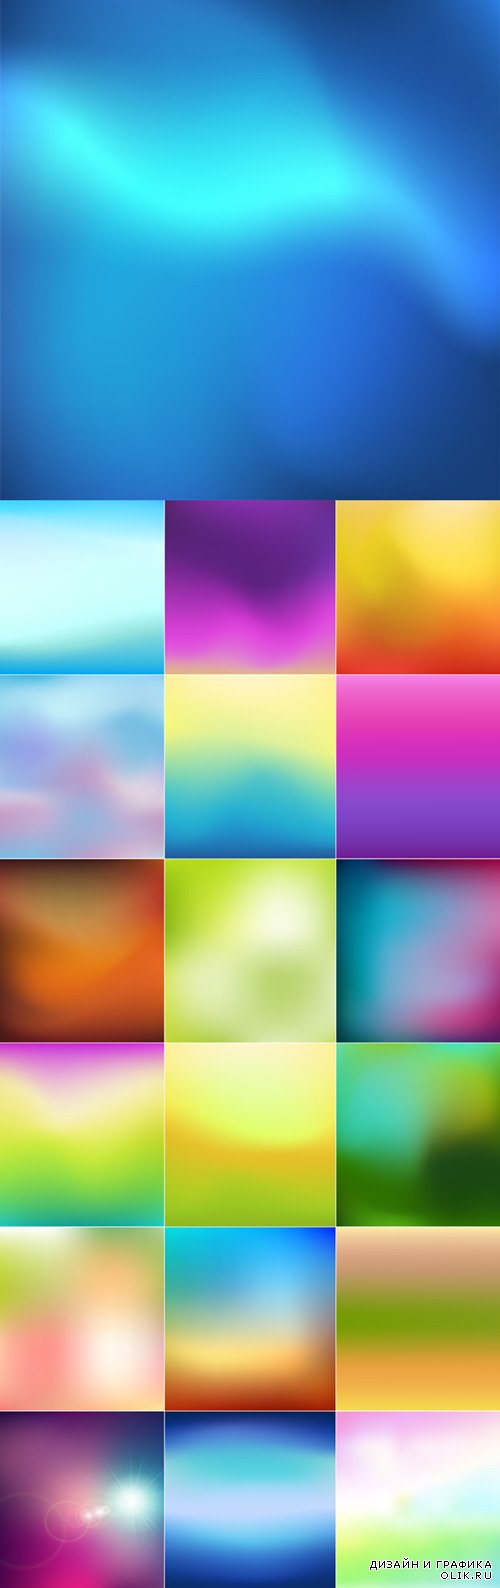 Blurred backgrounds vector